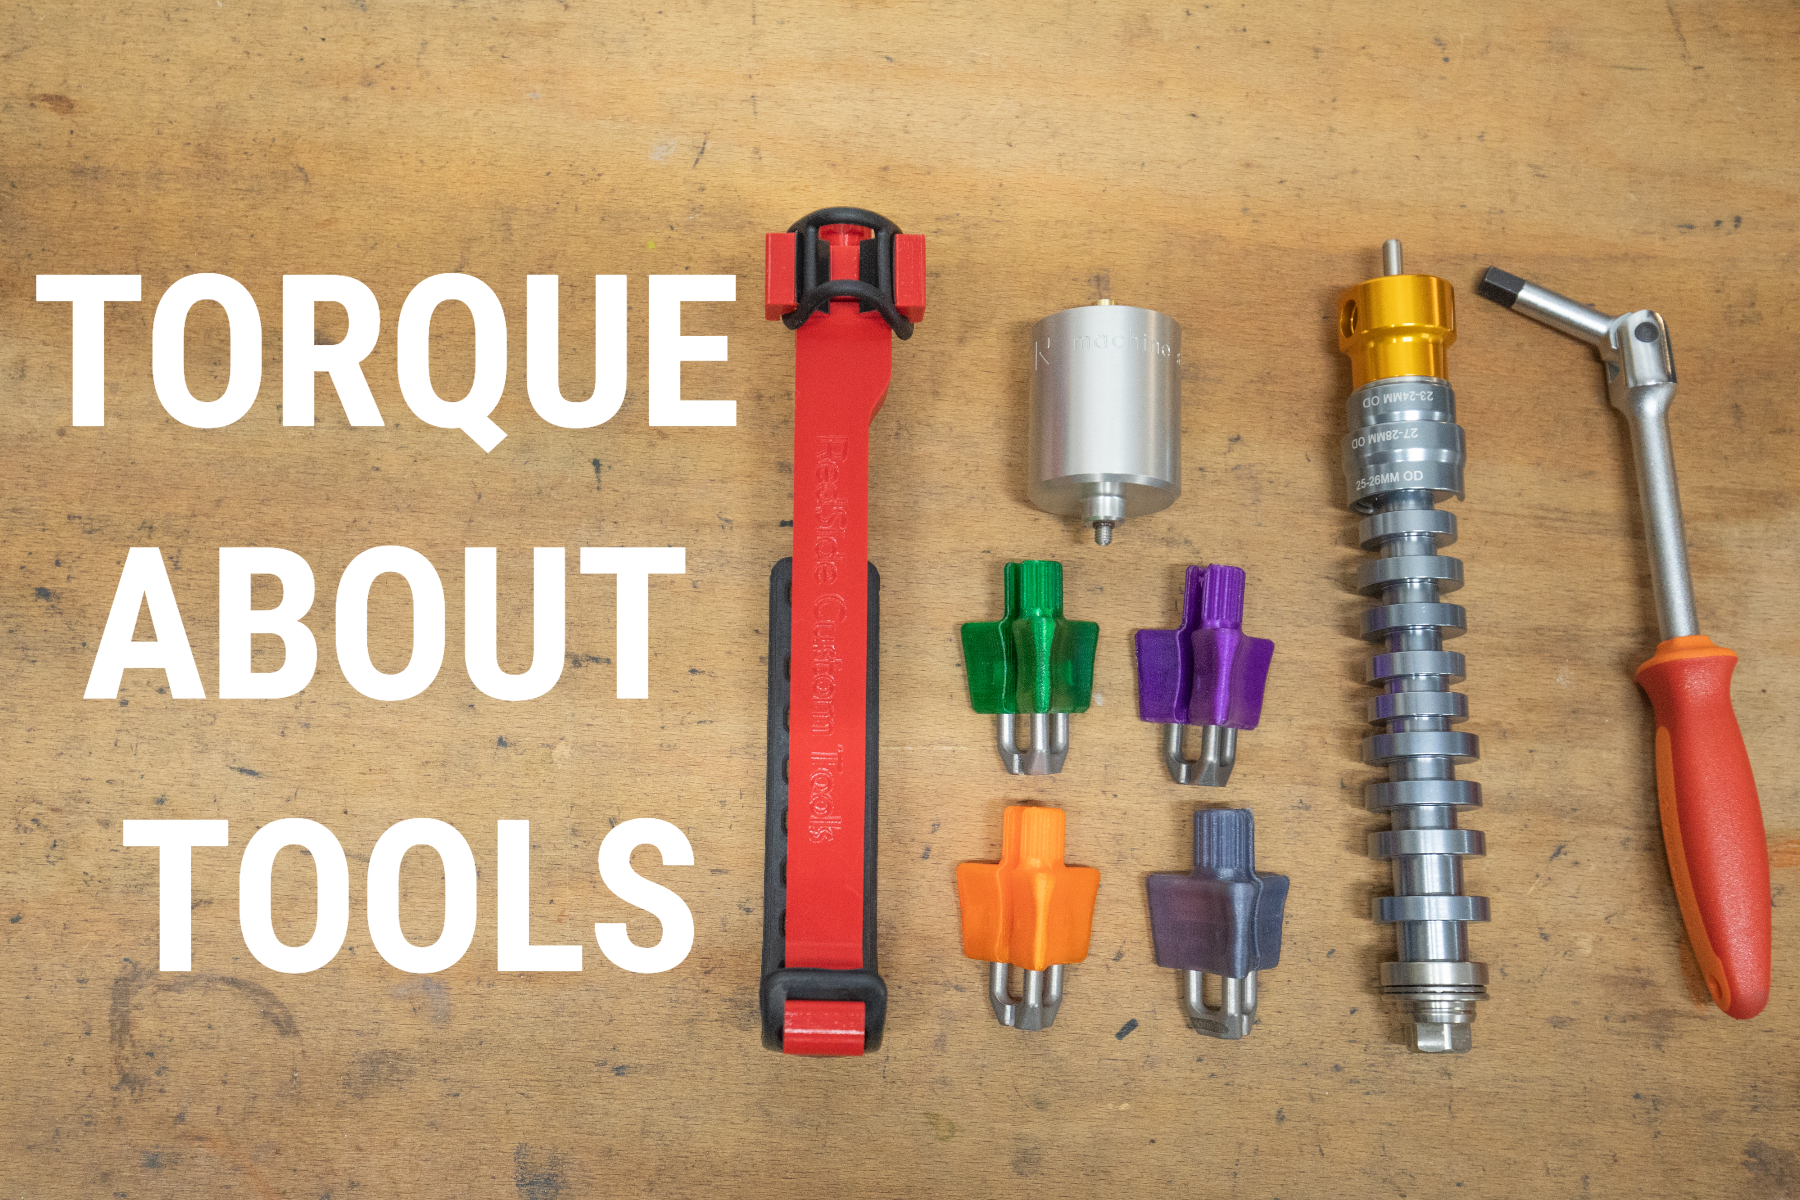 Torque About Tools | From 3D-printed spoke wrenches to a silky smooth Enduro hub and suspension pivot bearing kit